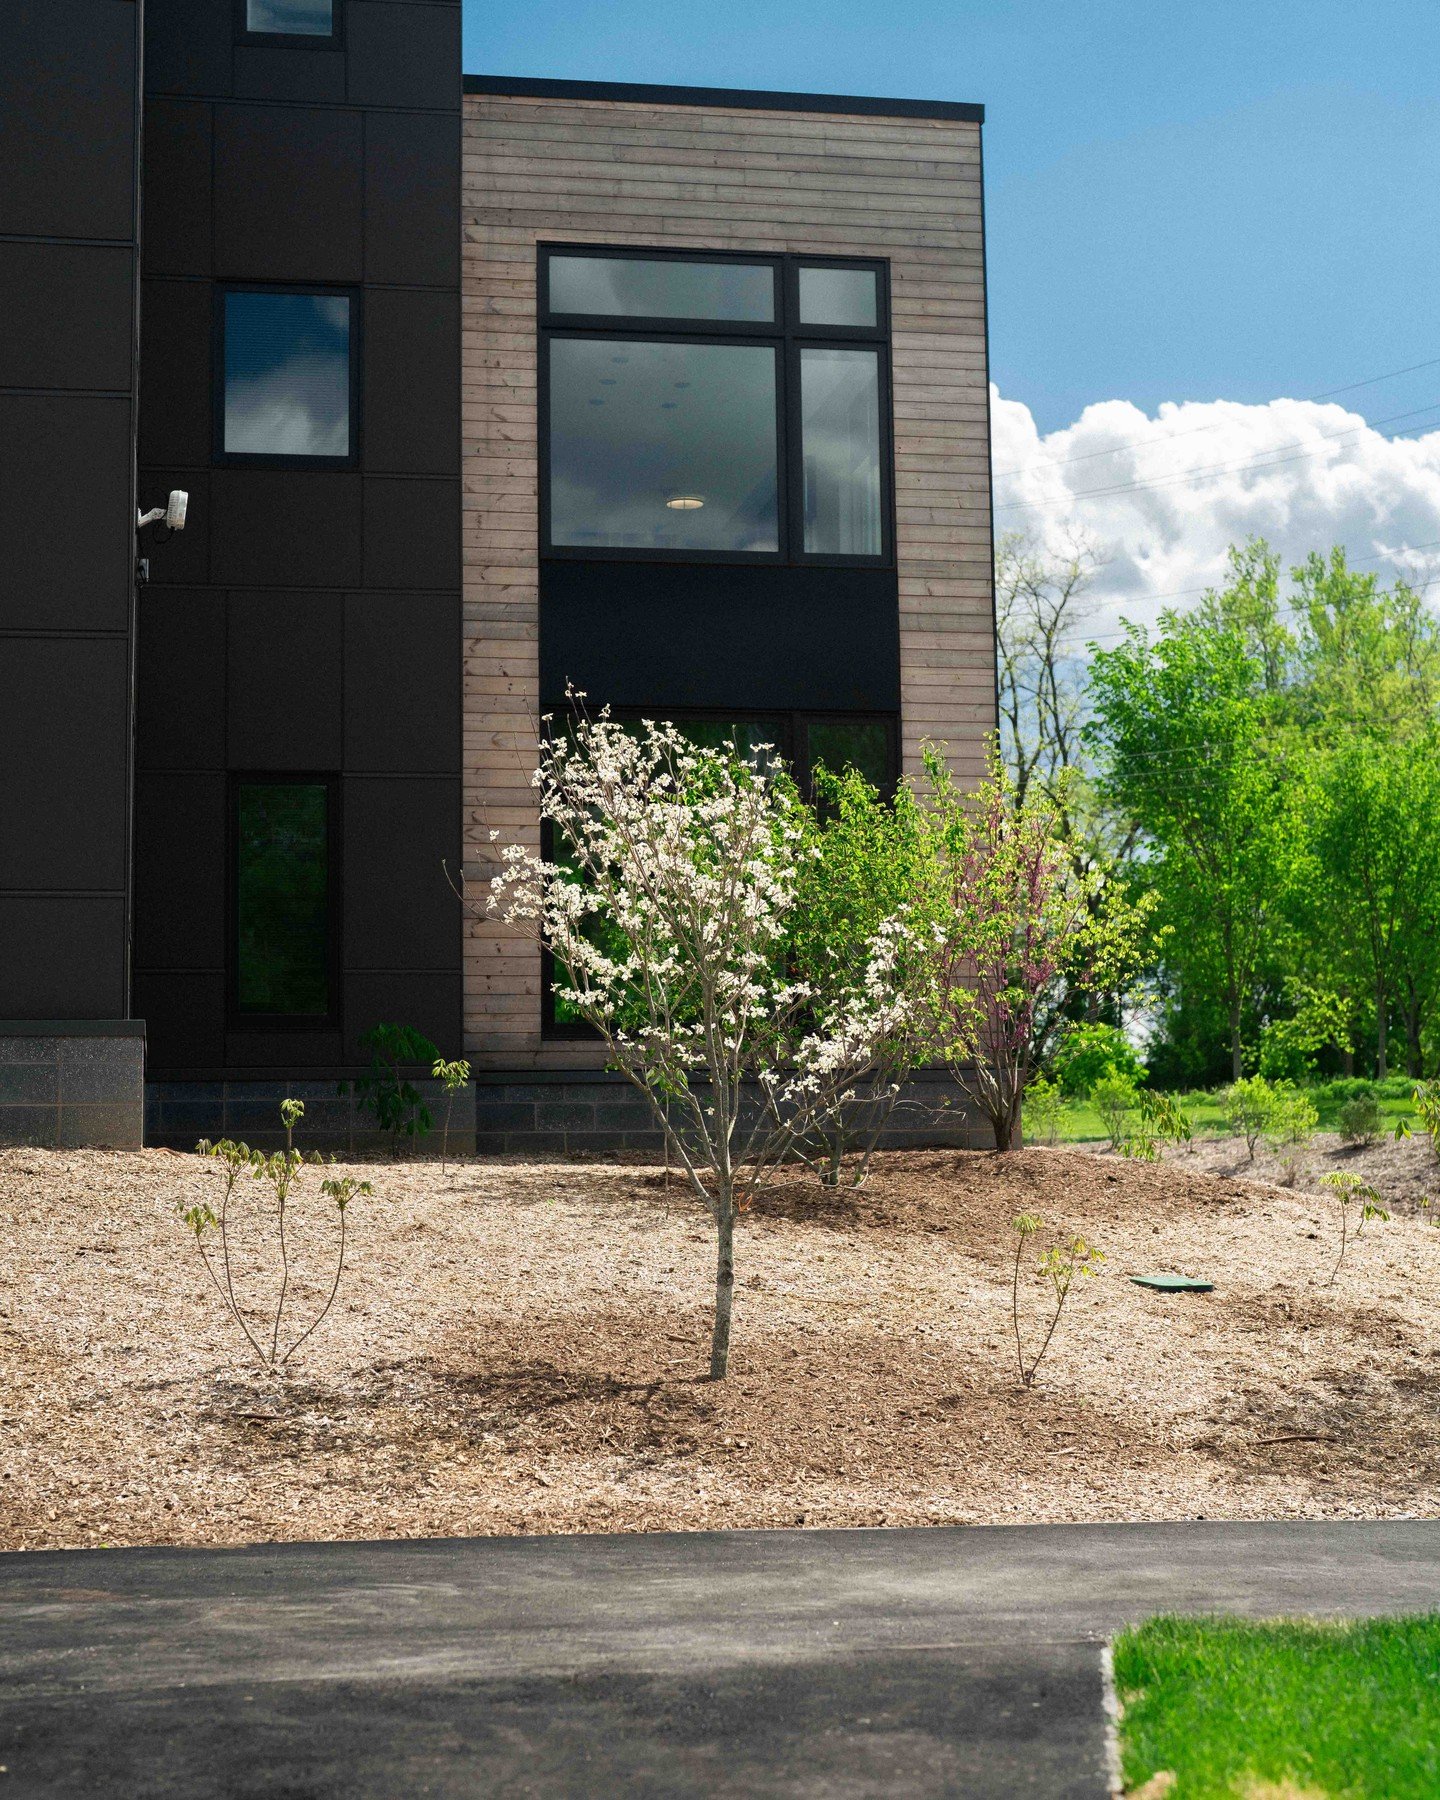 This flowering Dogwood features vibrant white blossoms and is known for its striking beauty in spring. It's a hardy tree that thrives in various conditions, making it an ideal choice for a college campus! #MayfieldGardens

#construction #landscaping 